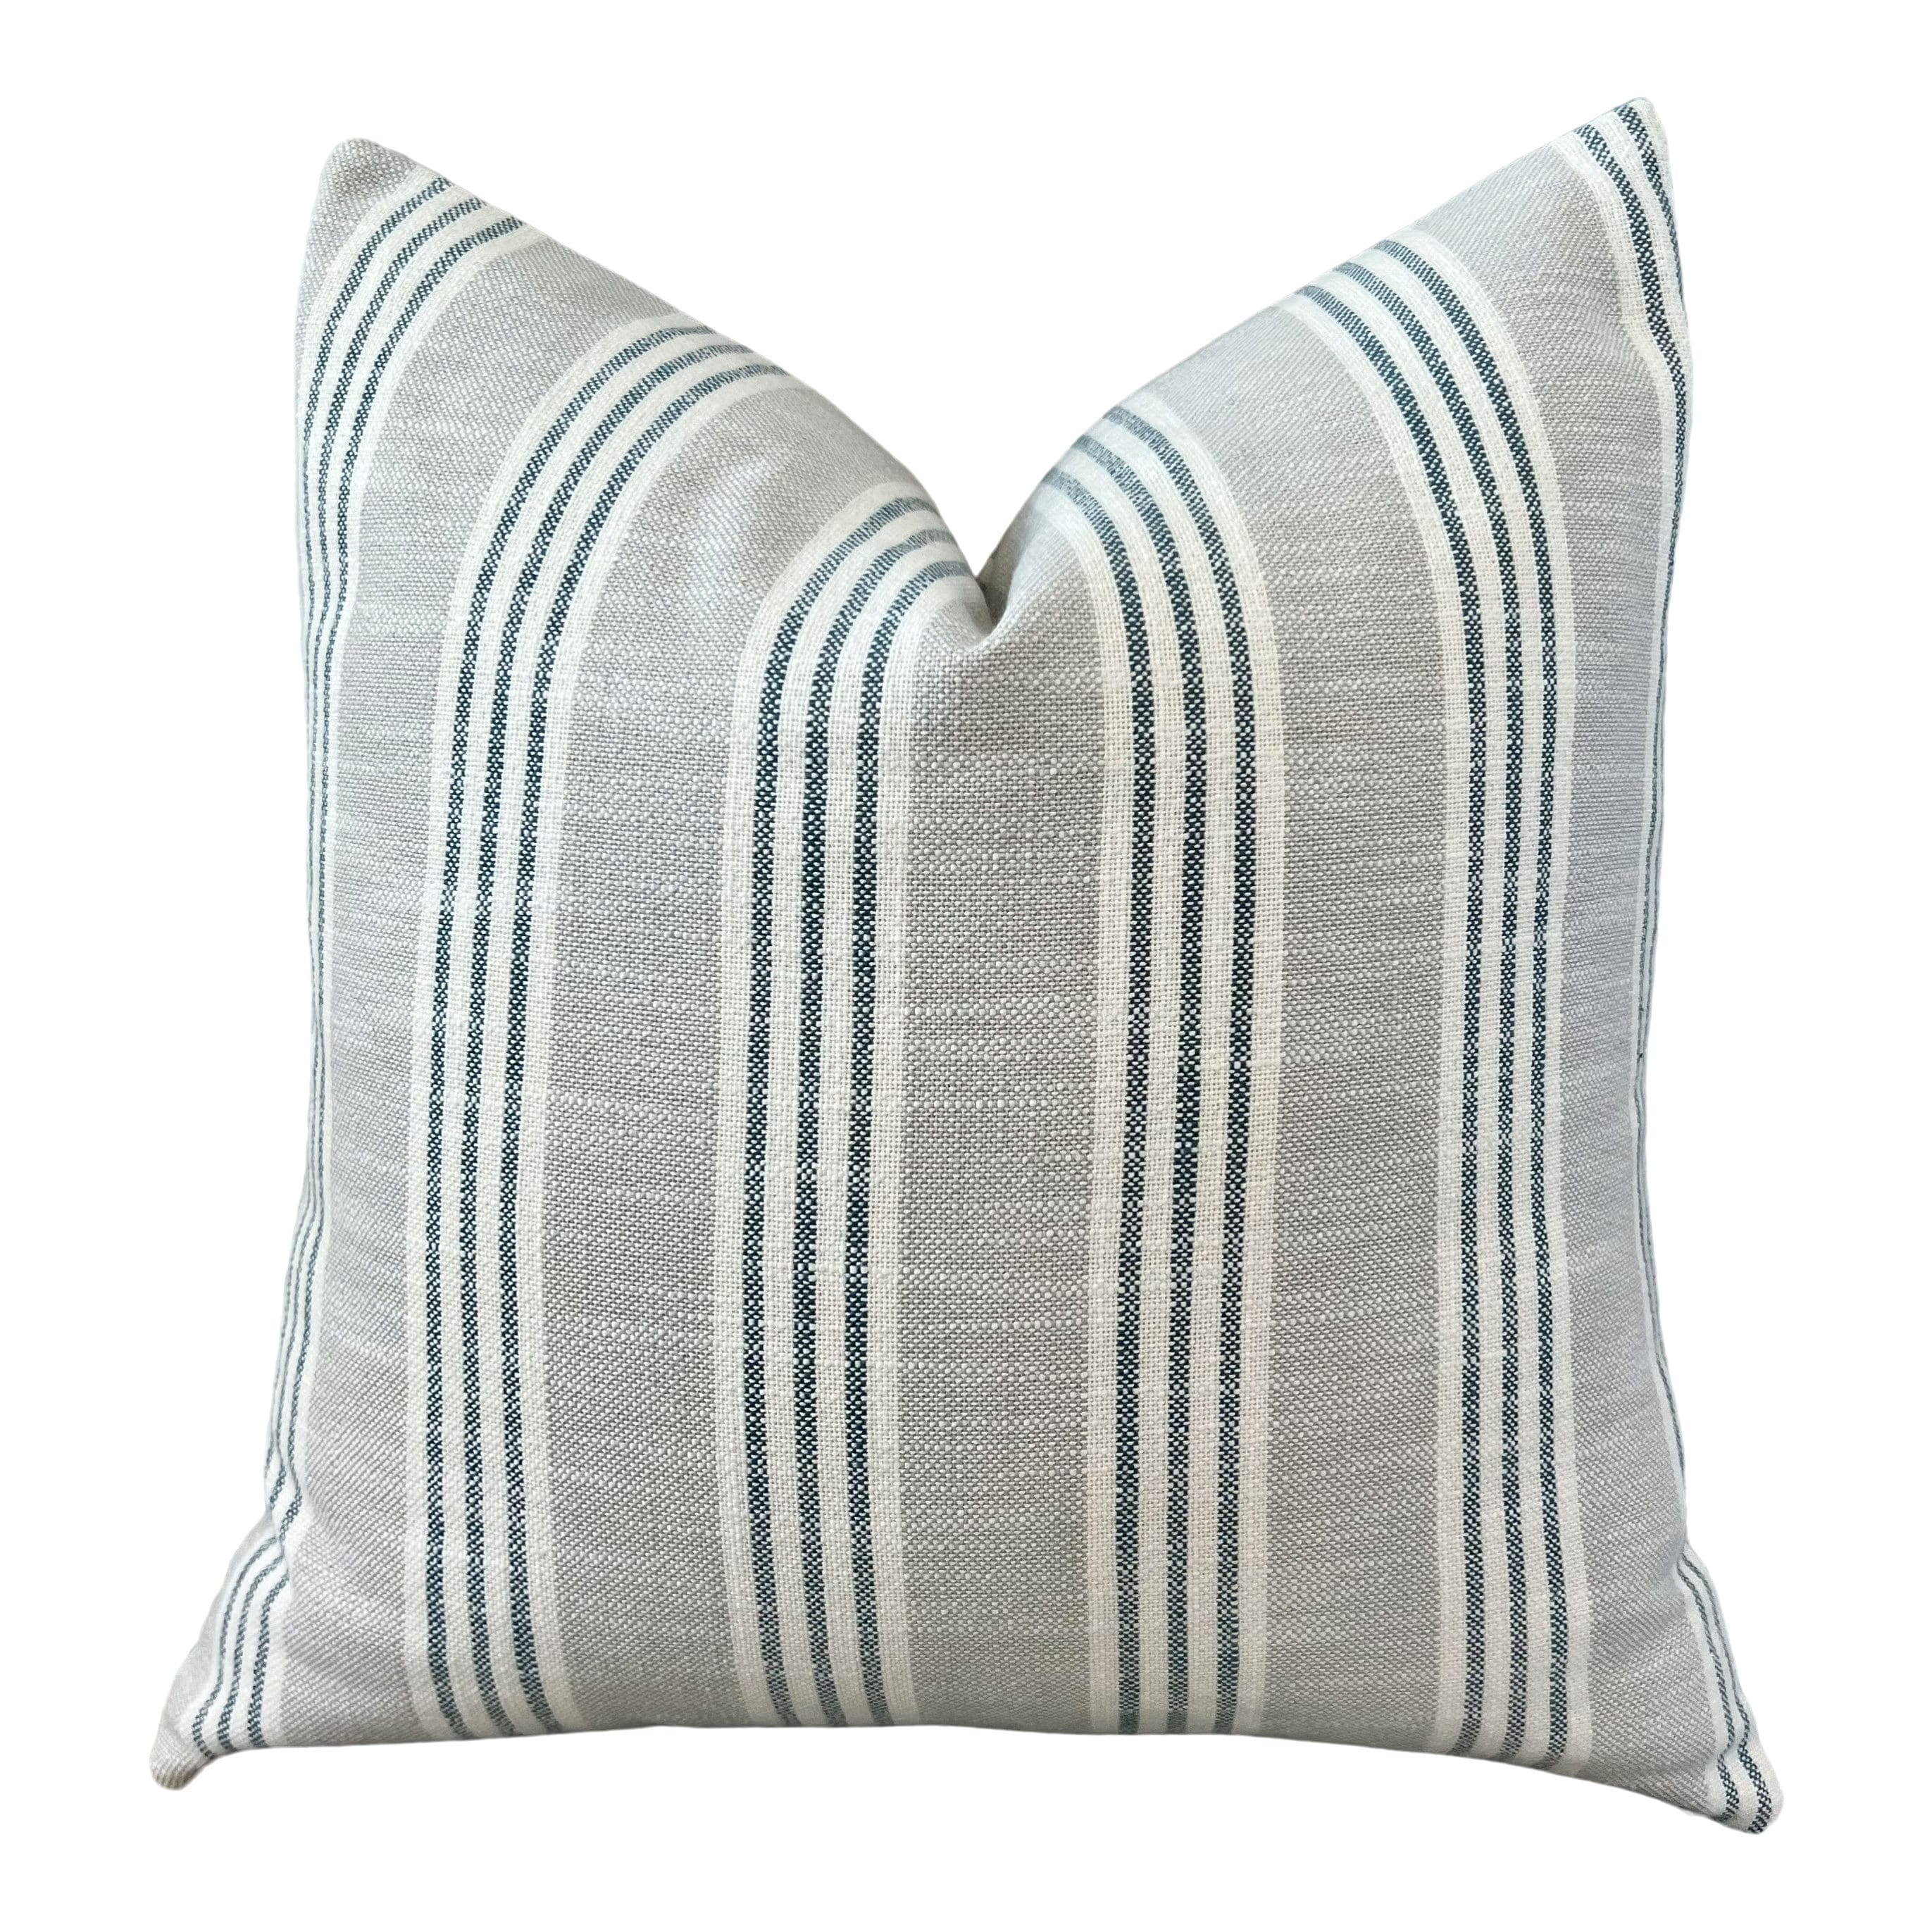 Thibaut Indoor/Outdoor Woven Southport Stripe Pillow in Sterling and Cobalt. Outdoor Gray Striped Pillow Covers, Accent Lumbar Pillows